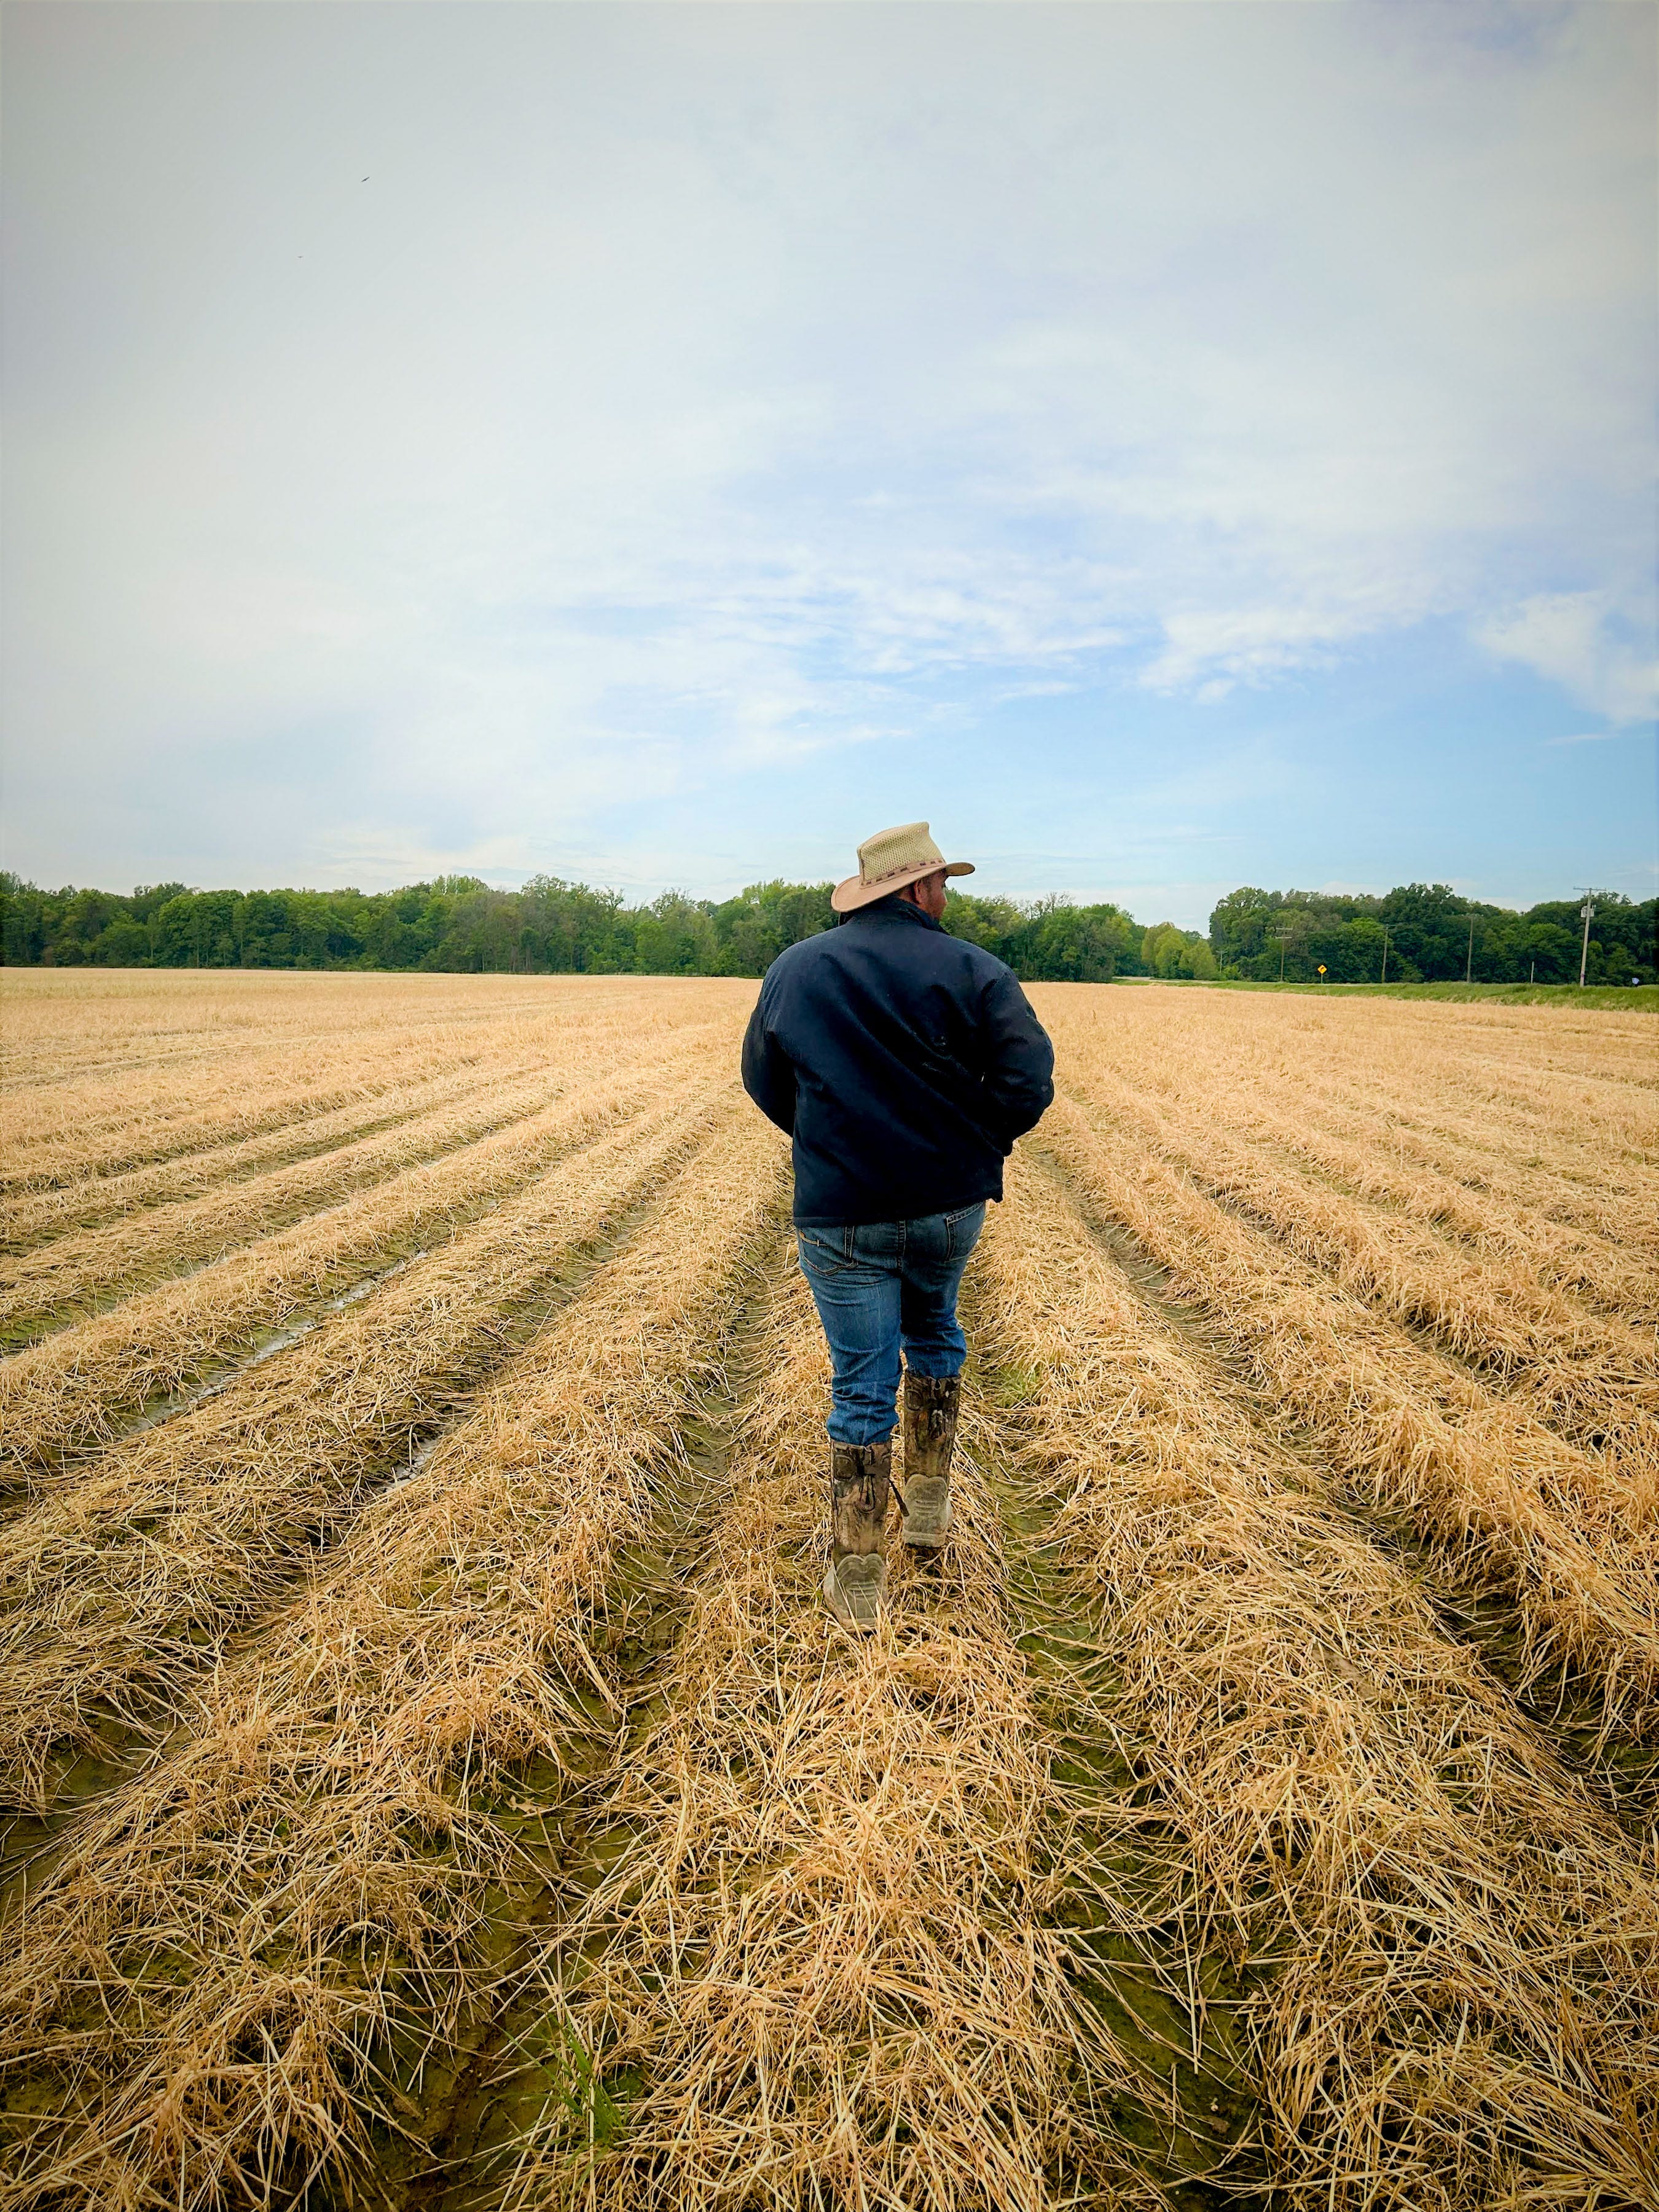 PJ Haynie surveys one of his rice fields on April 25, 2023. 

Haynie is a fifth-generation row crop farmer with land in Virginia and in Arkansas, which is where he grows his rice. He also co-owns a rice mill in Arkansas, helping to add value to one of the state's most important crops.